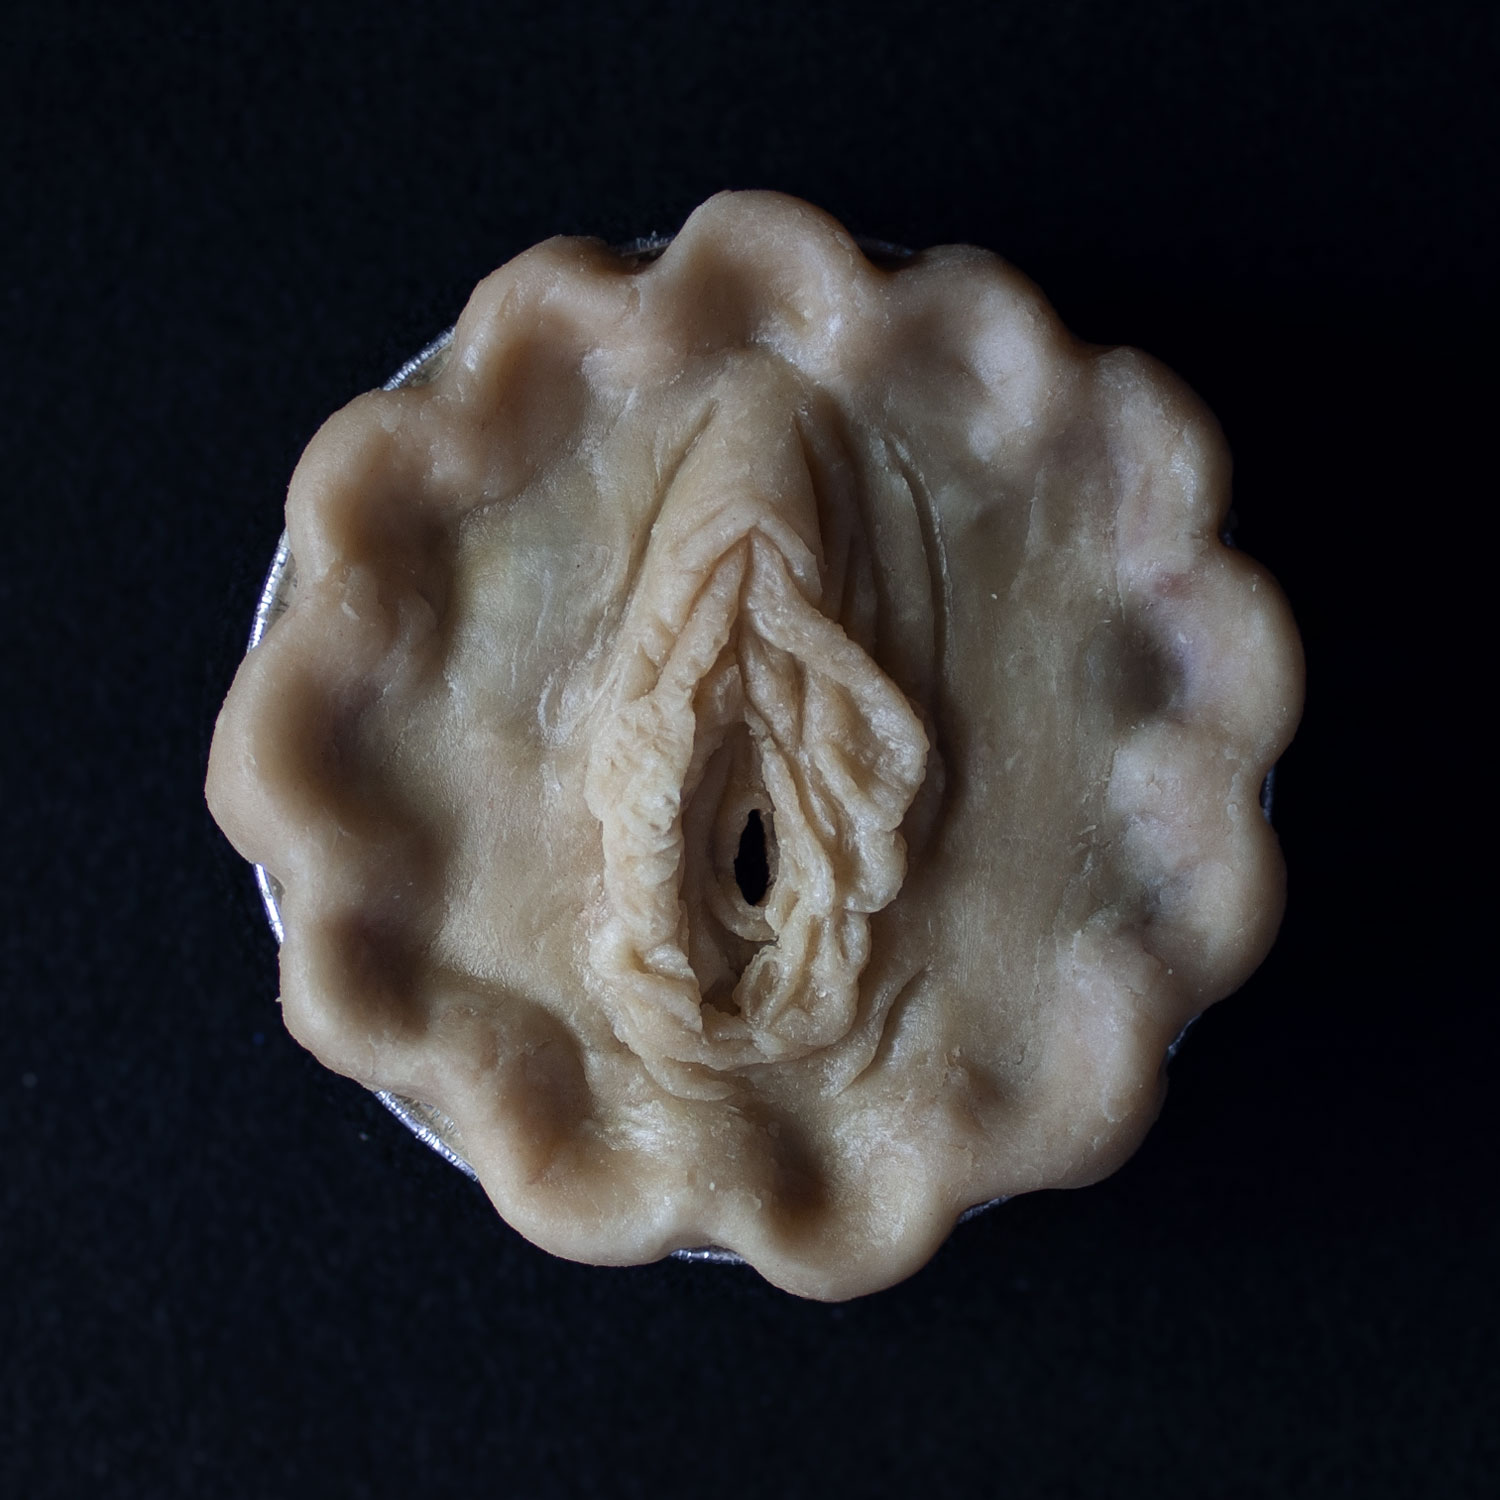 Pie 12, a pie sculpted to appear like a vulva